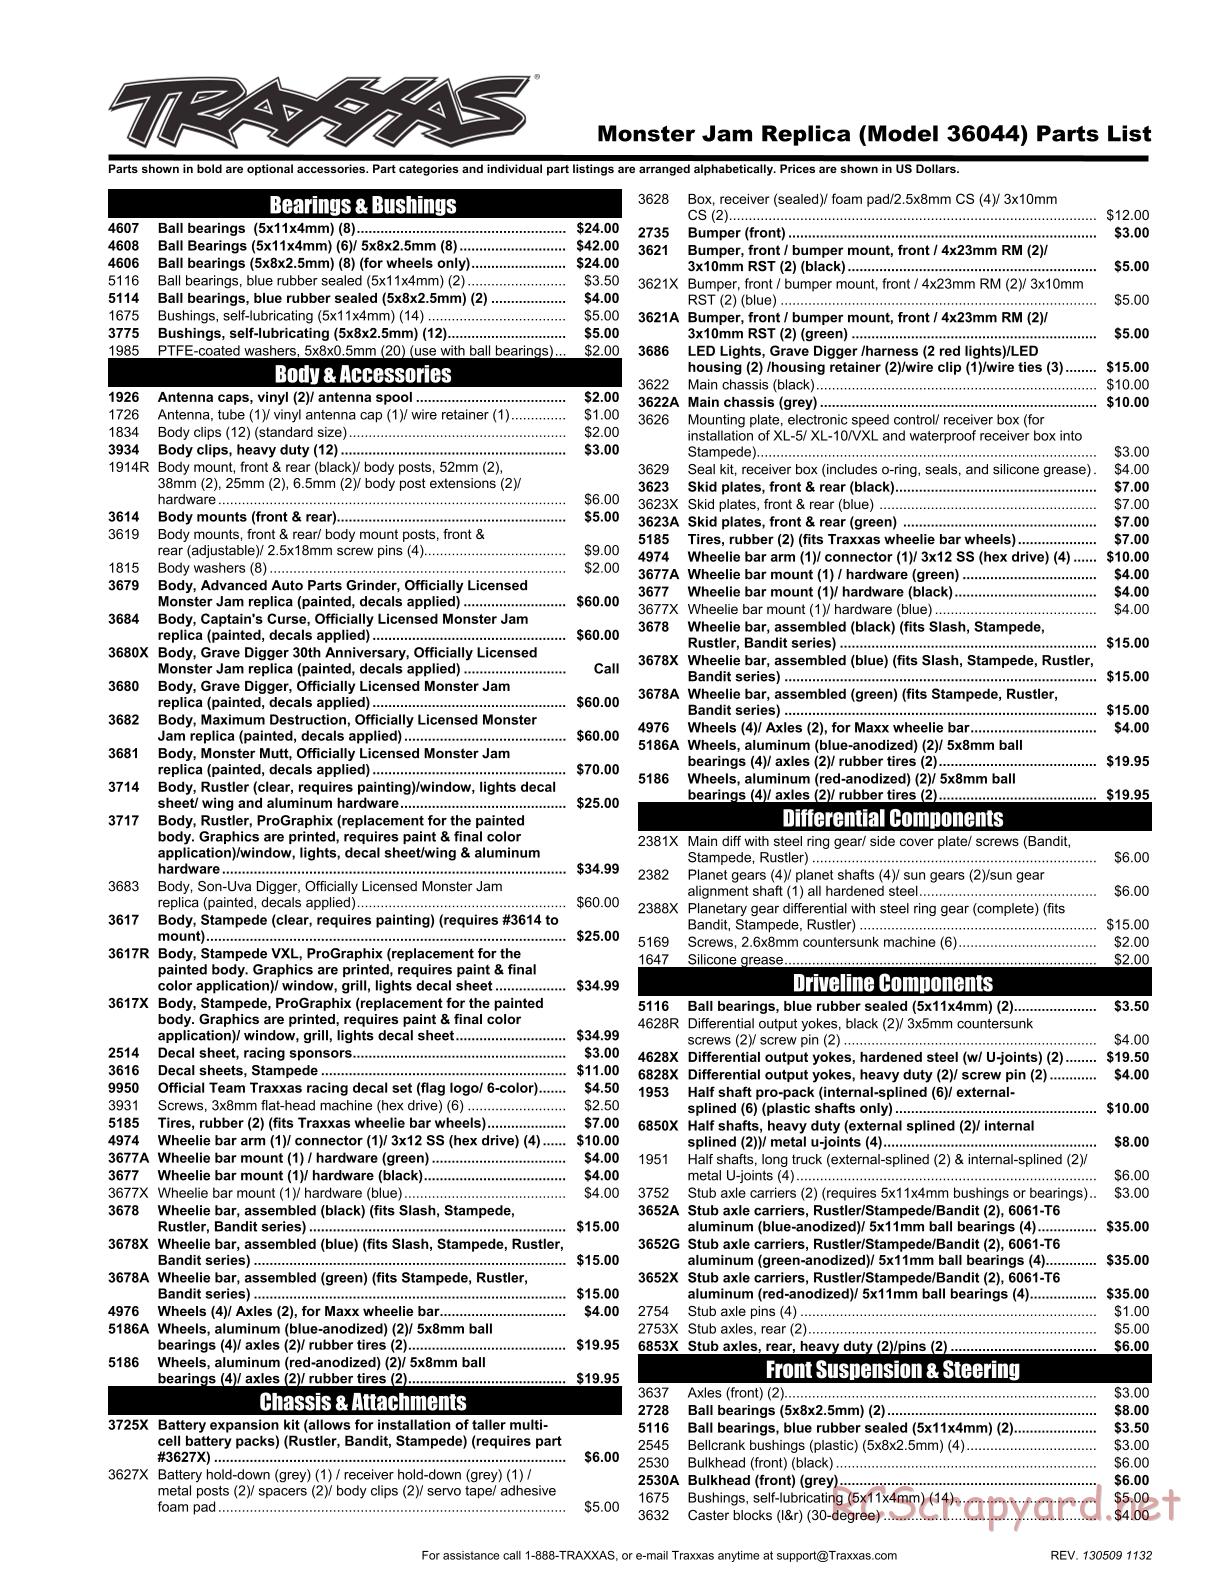 Traxxas - Monster Jam - Son-Uva Digger - Parts List - Page 1